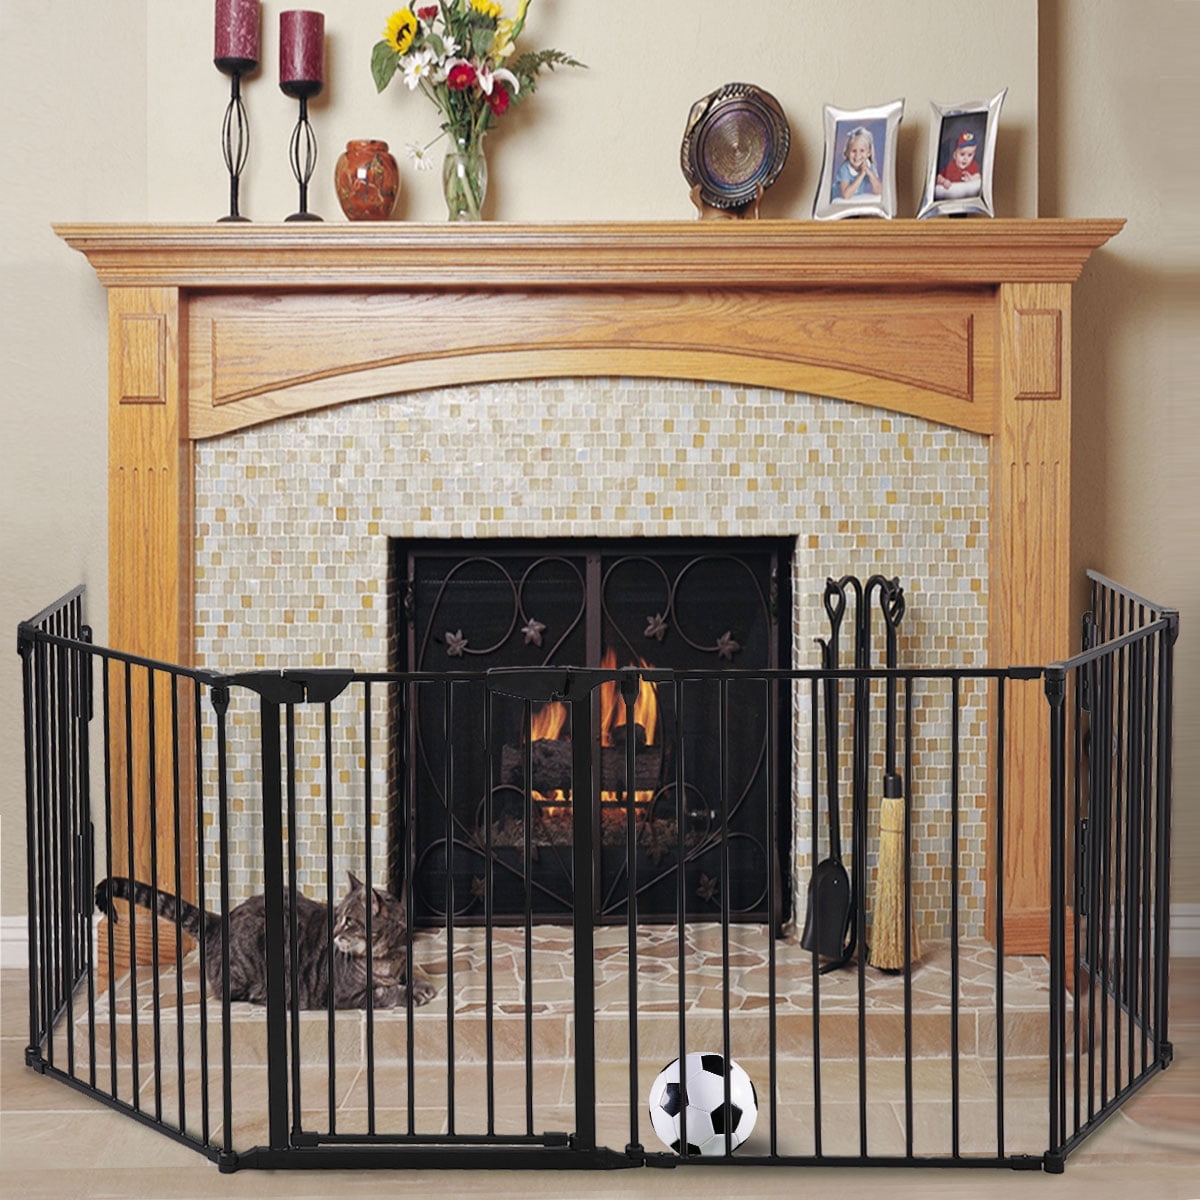 fireplace guard for baby